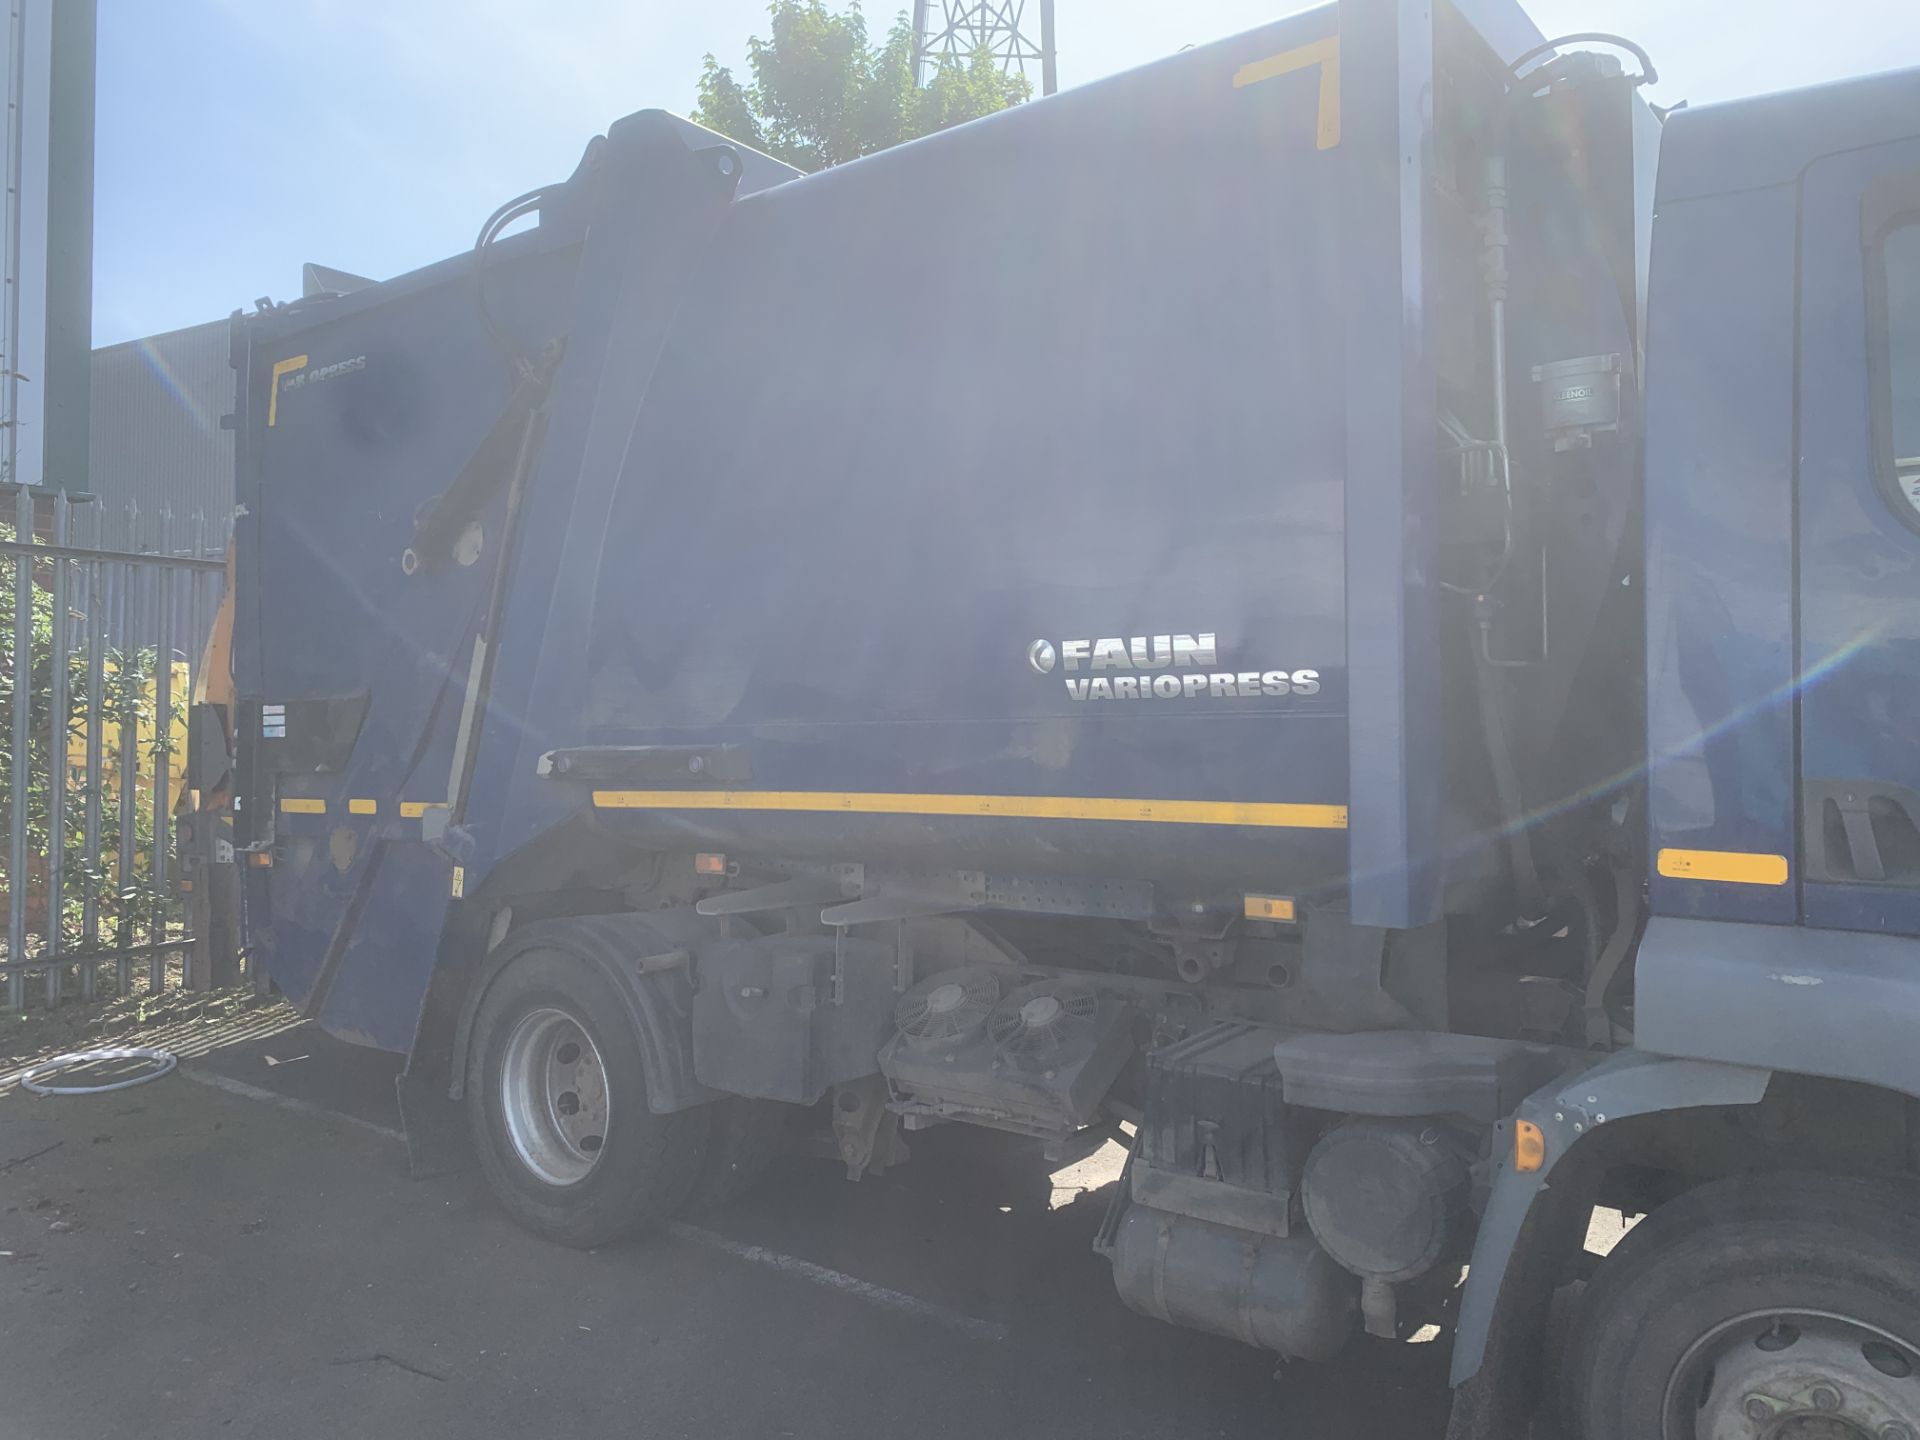 2013 BLUE DAF TRUCKS LF REFUSE COLLECTION VEHICLE - Image 3 of 12